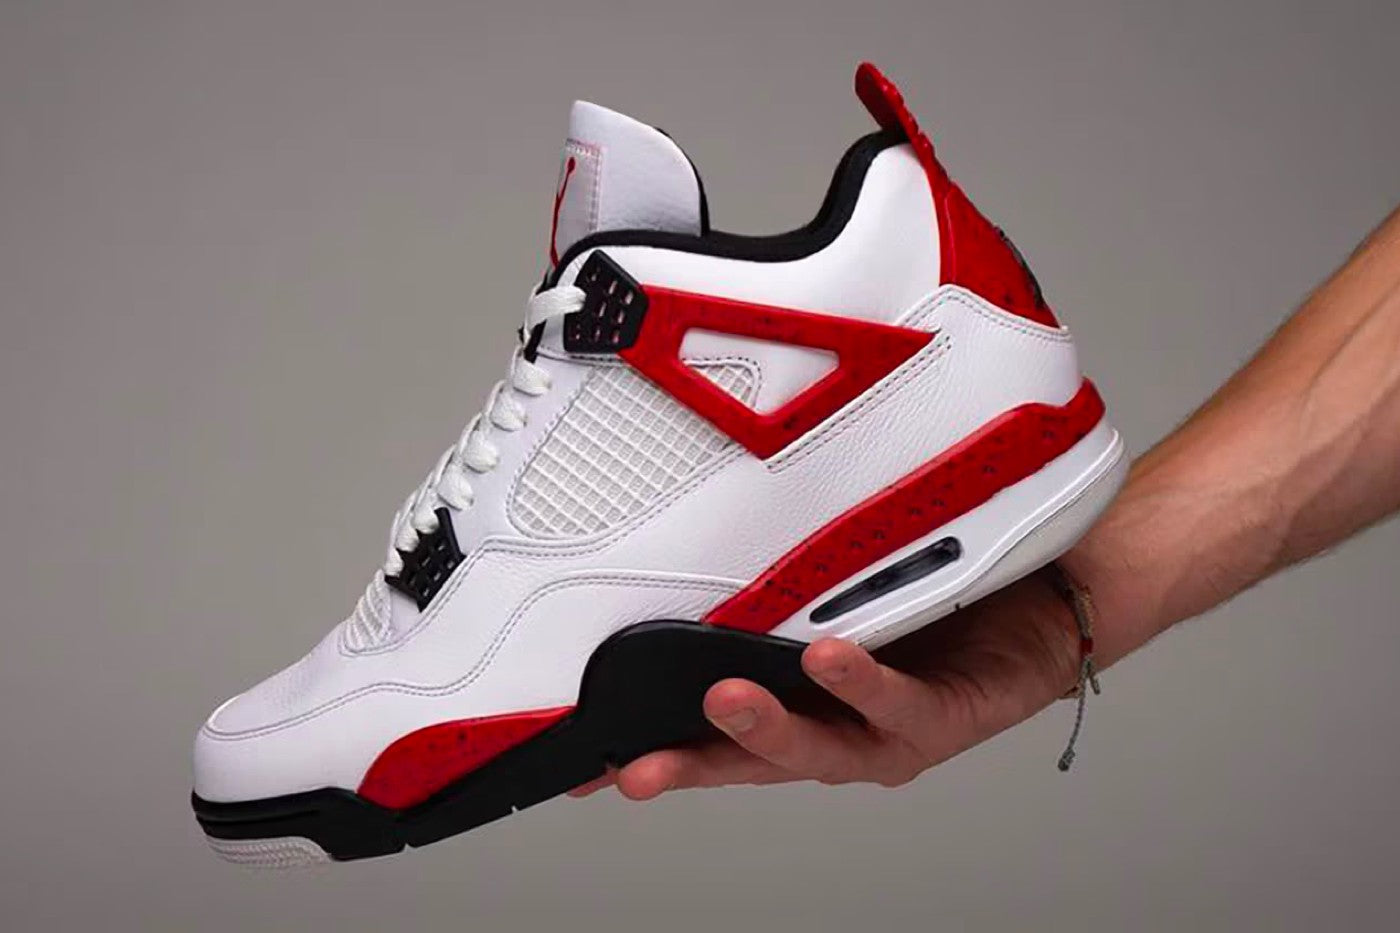 Get Up Close With the Air Jordan 4 "Red Cement"